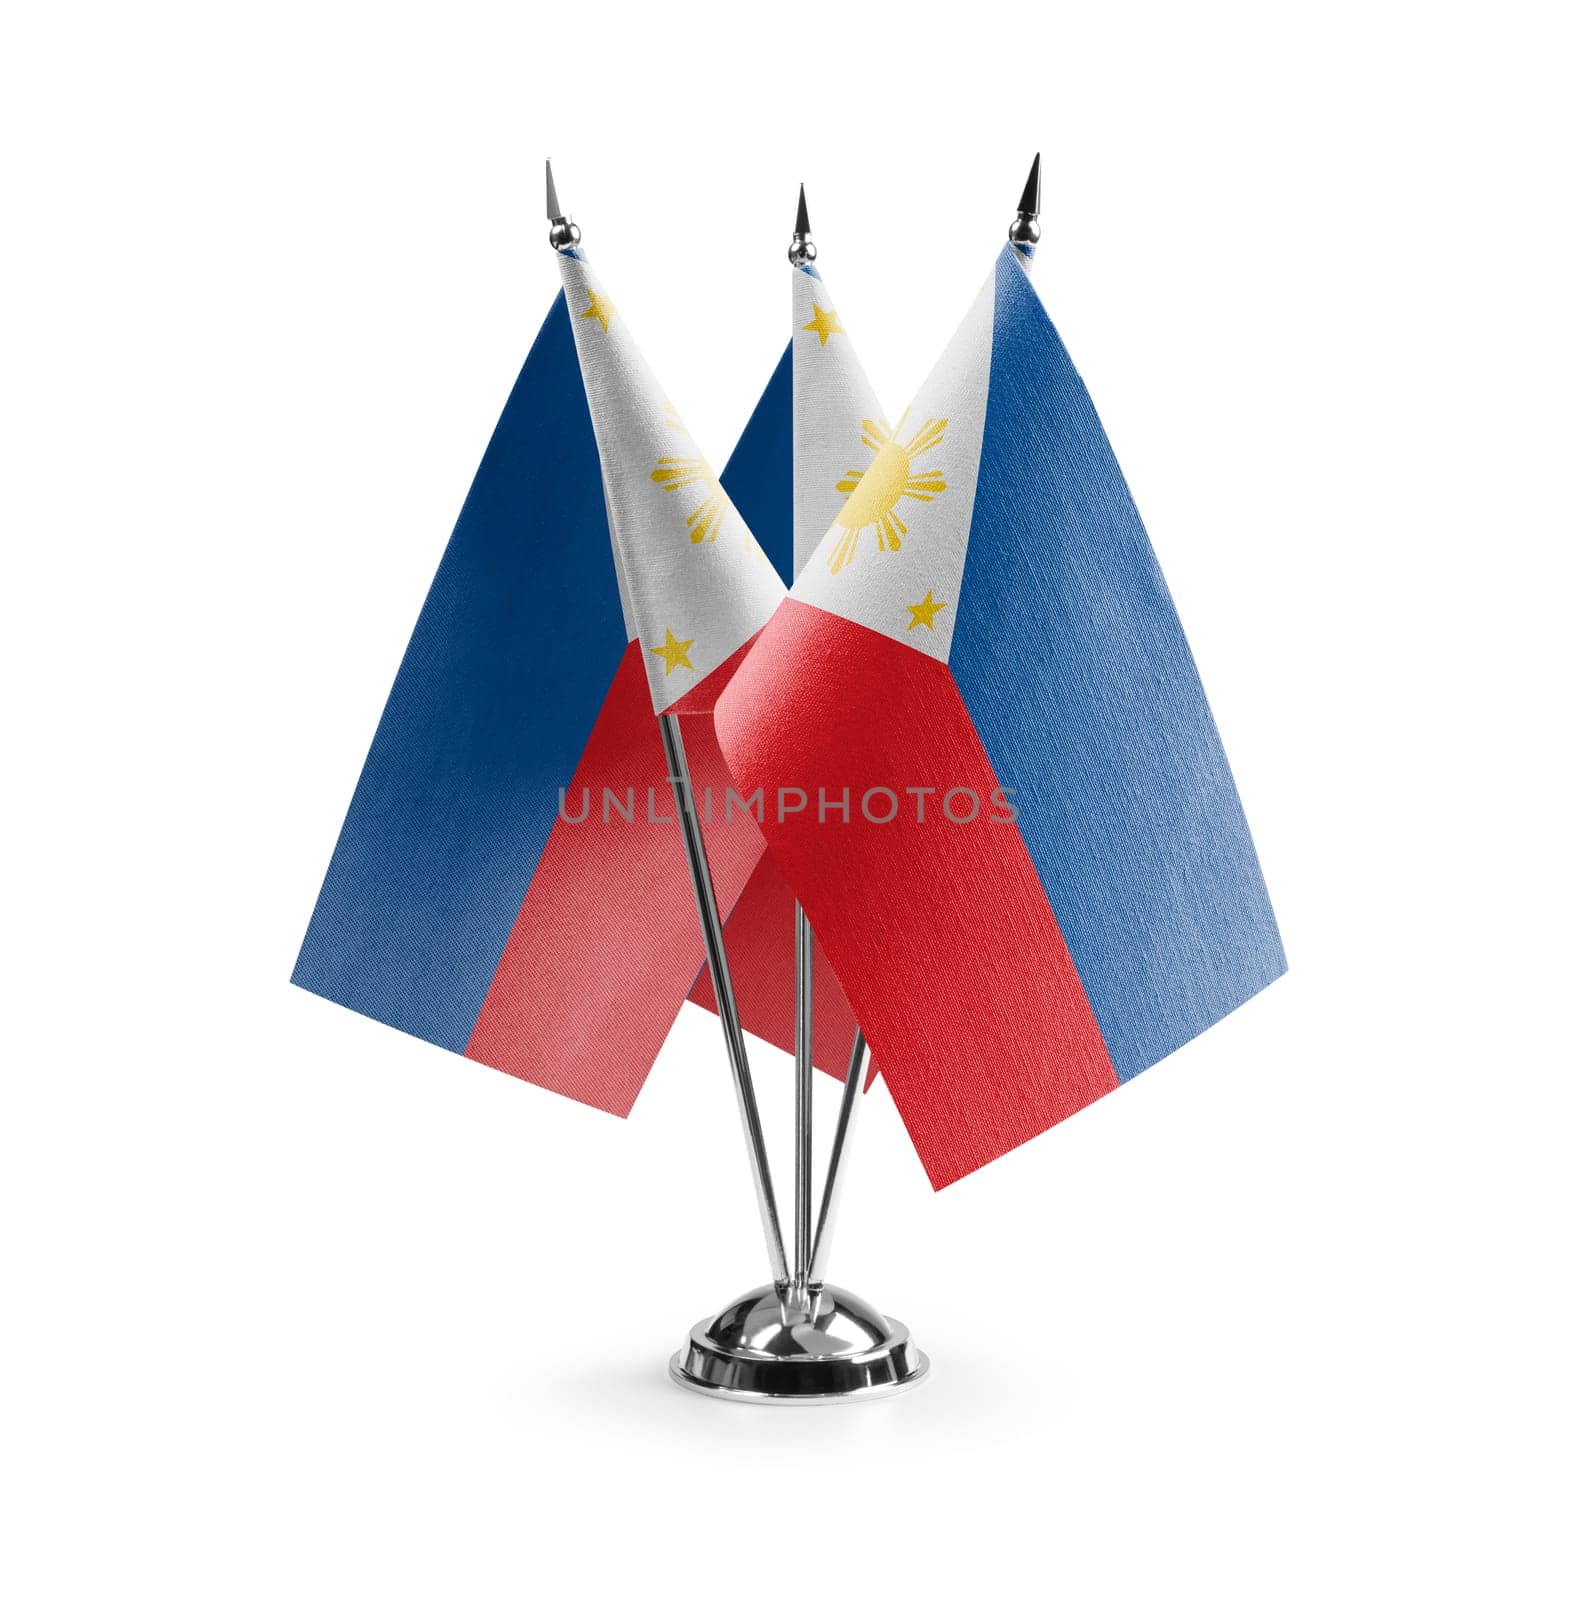 Small national flags of the Philippines on a white background.